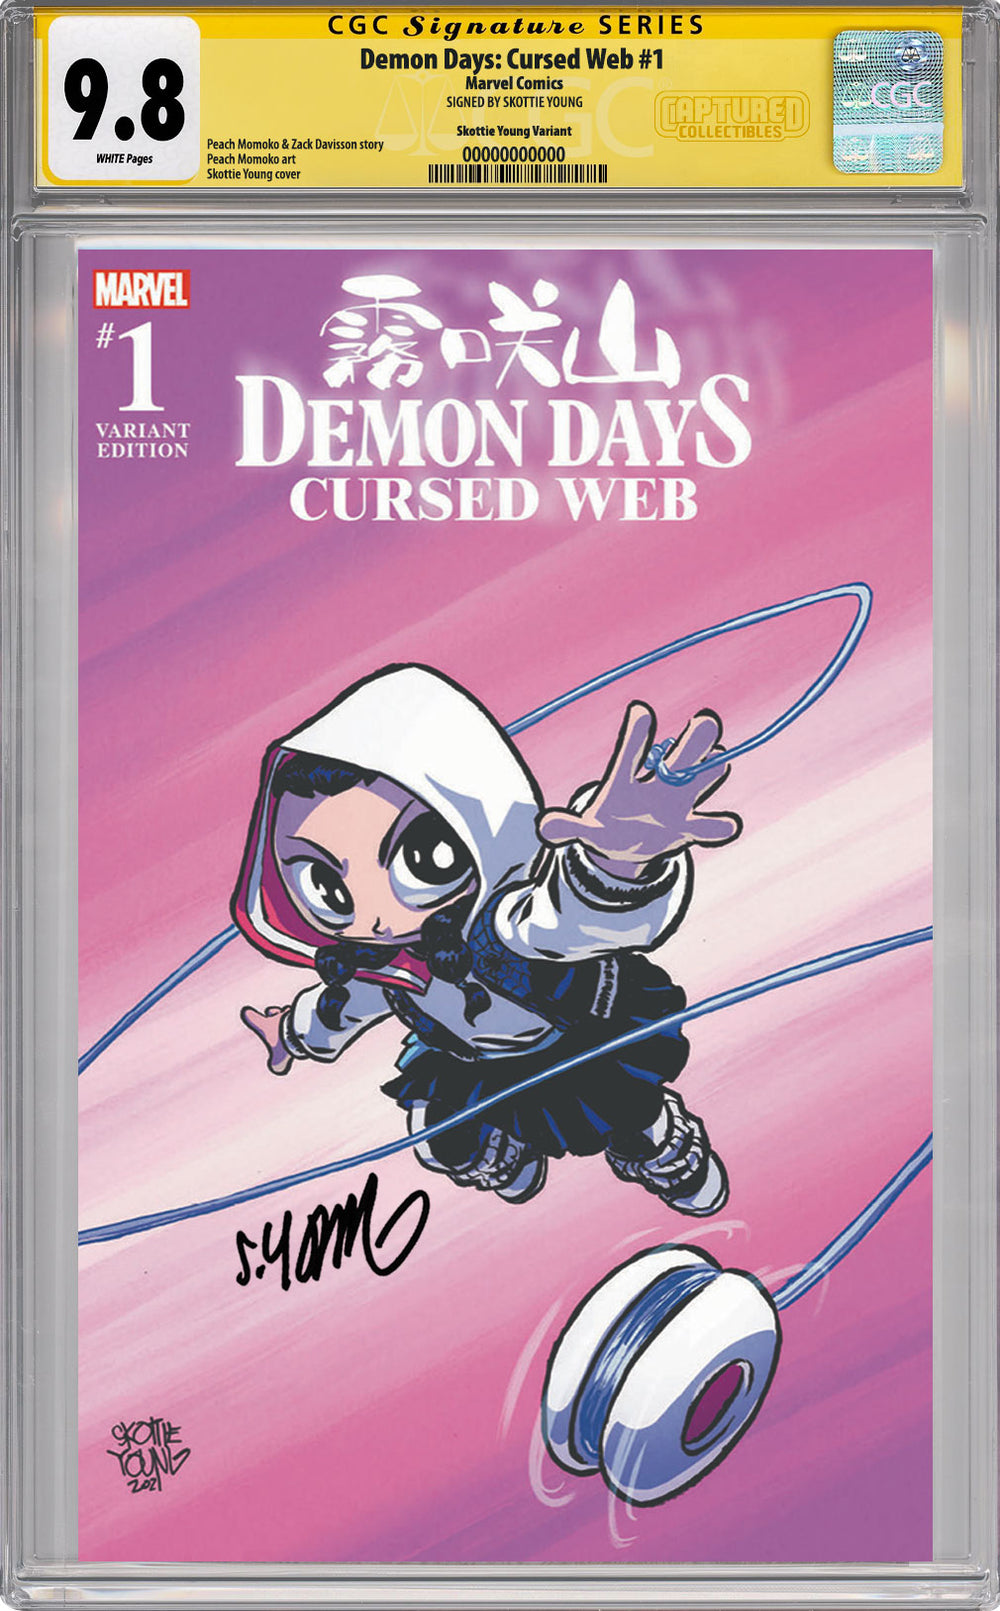 Demon Days: Cursed Web #1 Variant CGC SS 9.8 Signed by Skottie Young